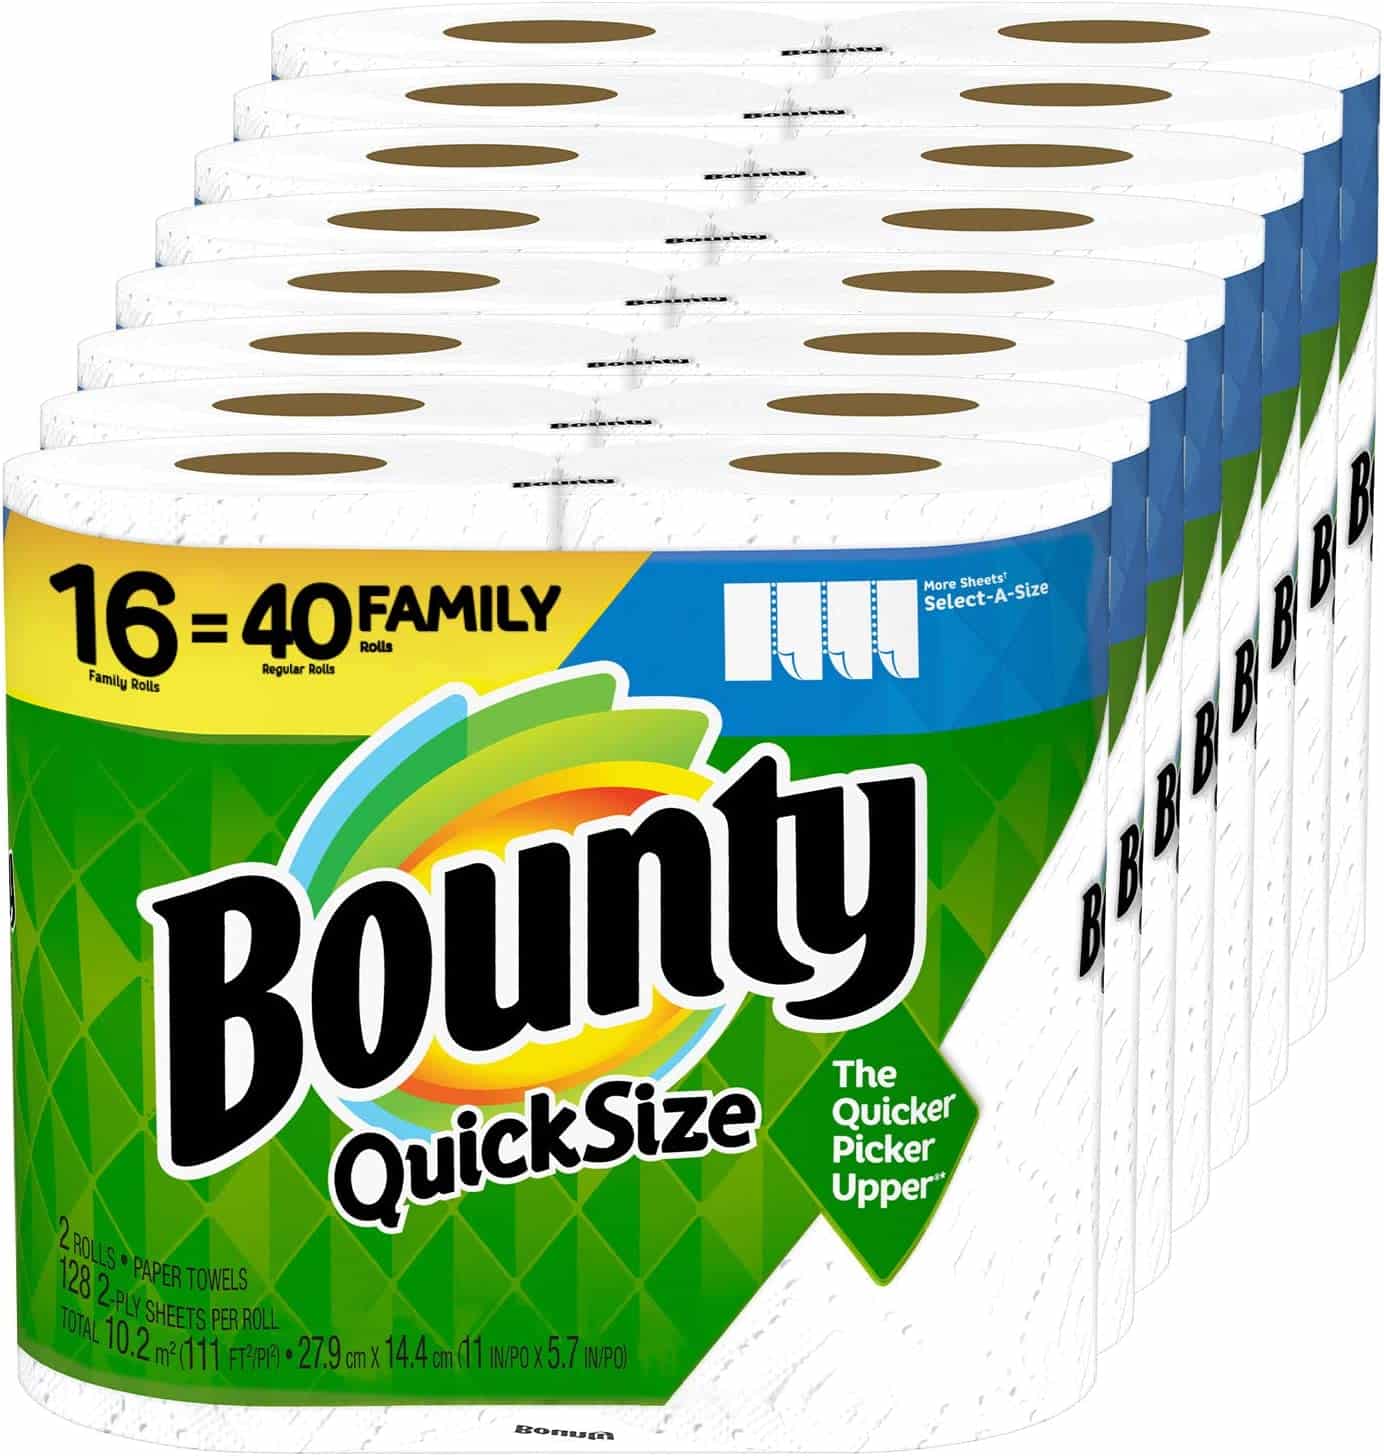 Bounty Quick-Size Paper Towels Logo